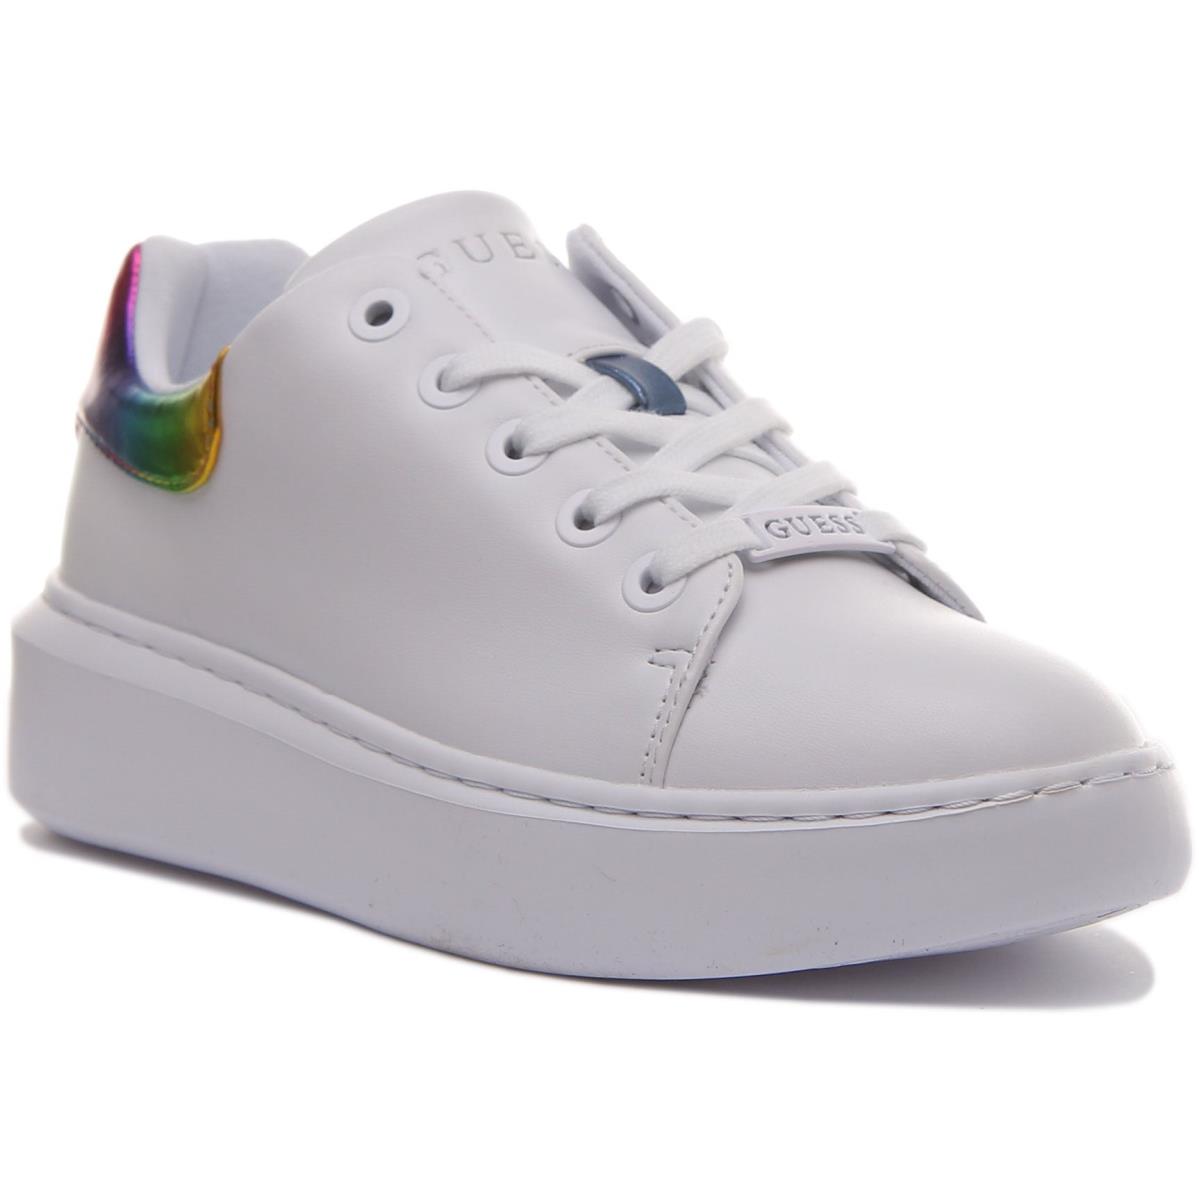 Guess Fl6Brdlel12 In White Multi Bradly Logo Detail Front Trainer Size US 5 - 11 WHITE MULTI